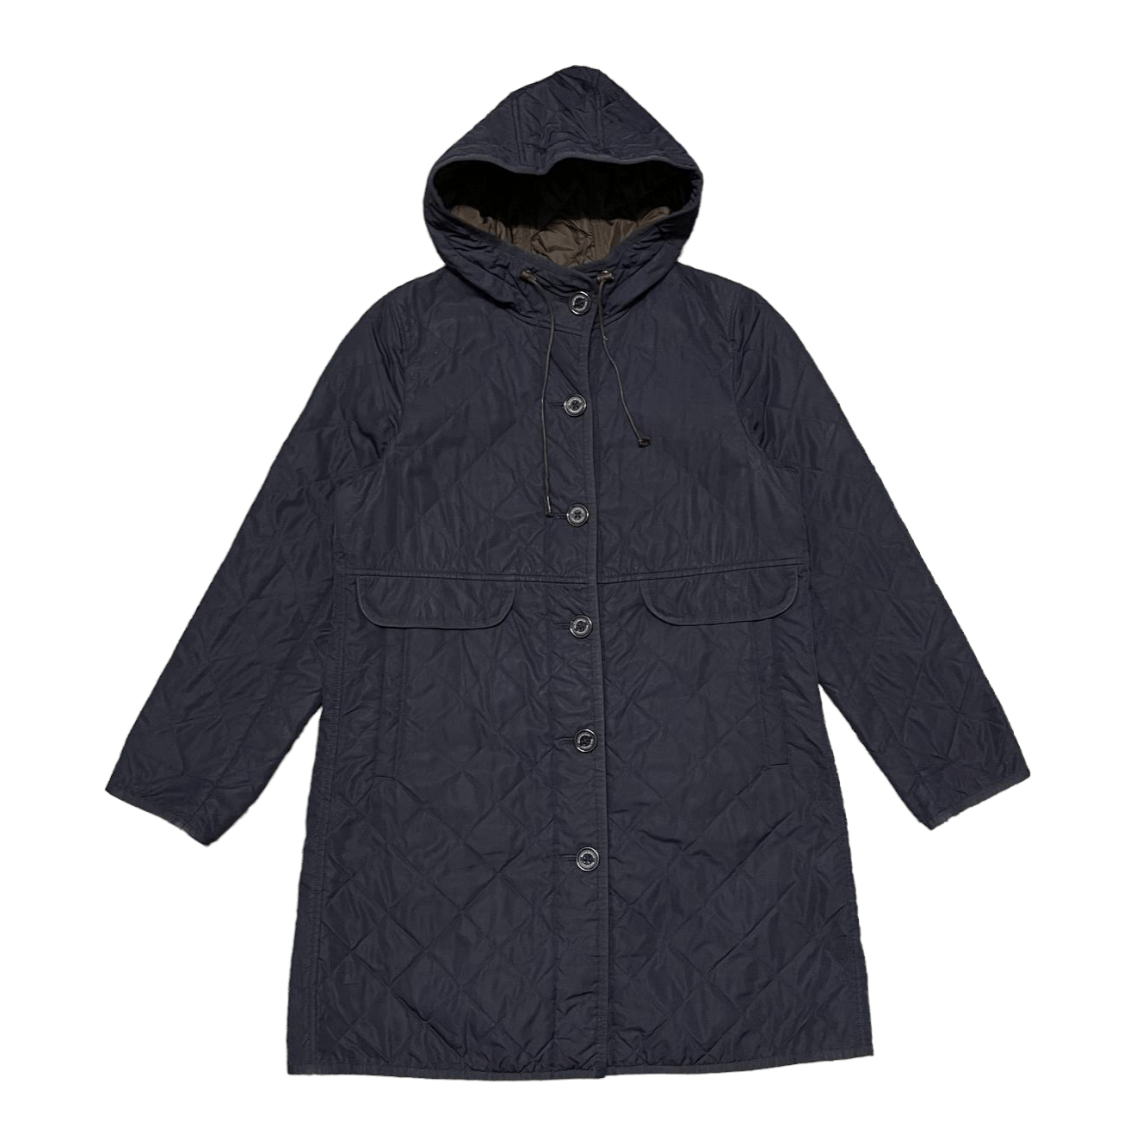 Mackintosh Philosophy Quilted Hooded Jacket - 1